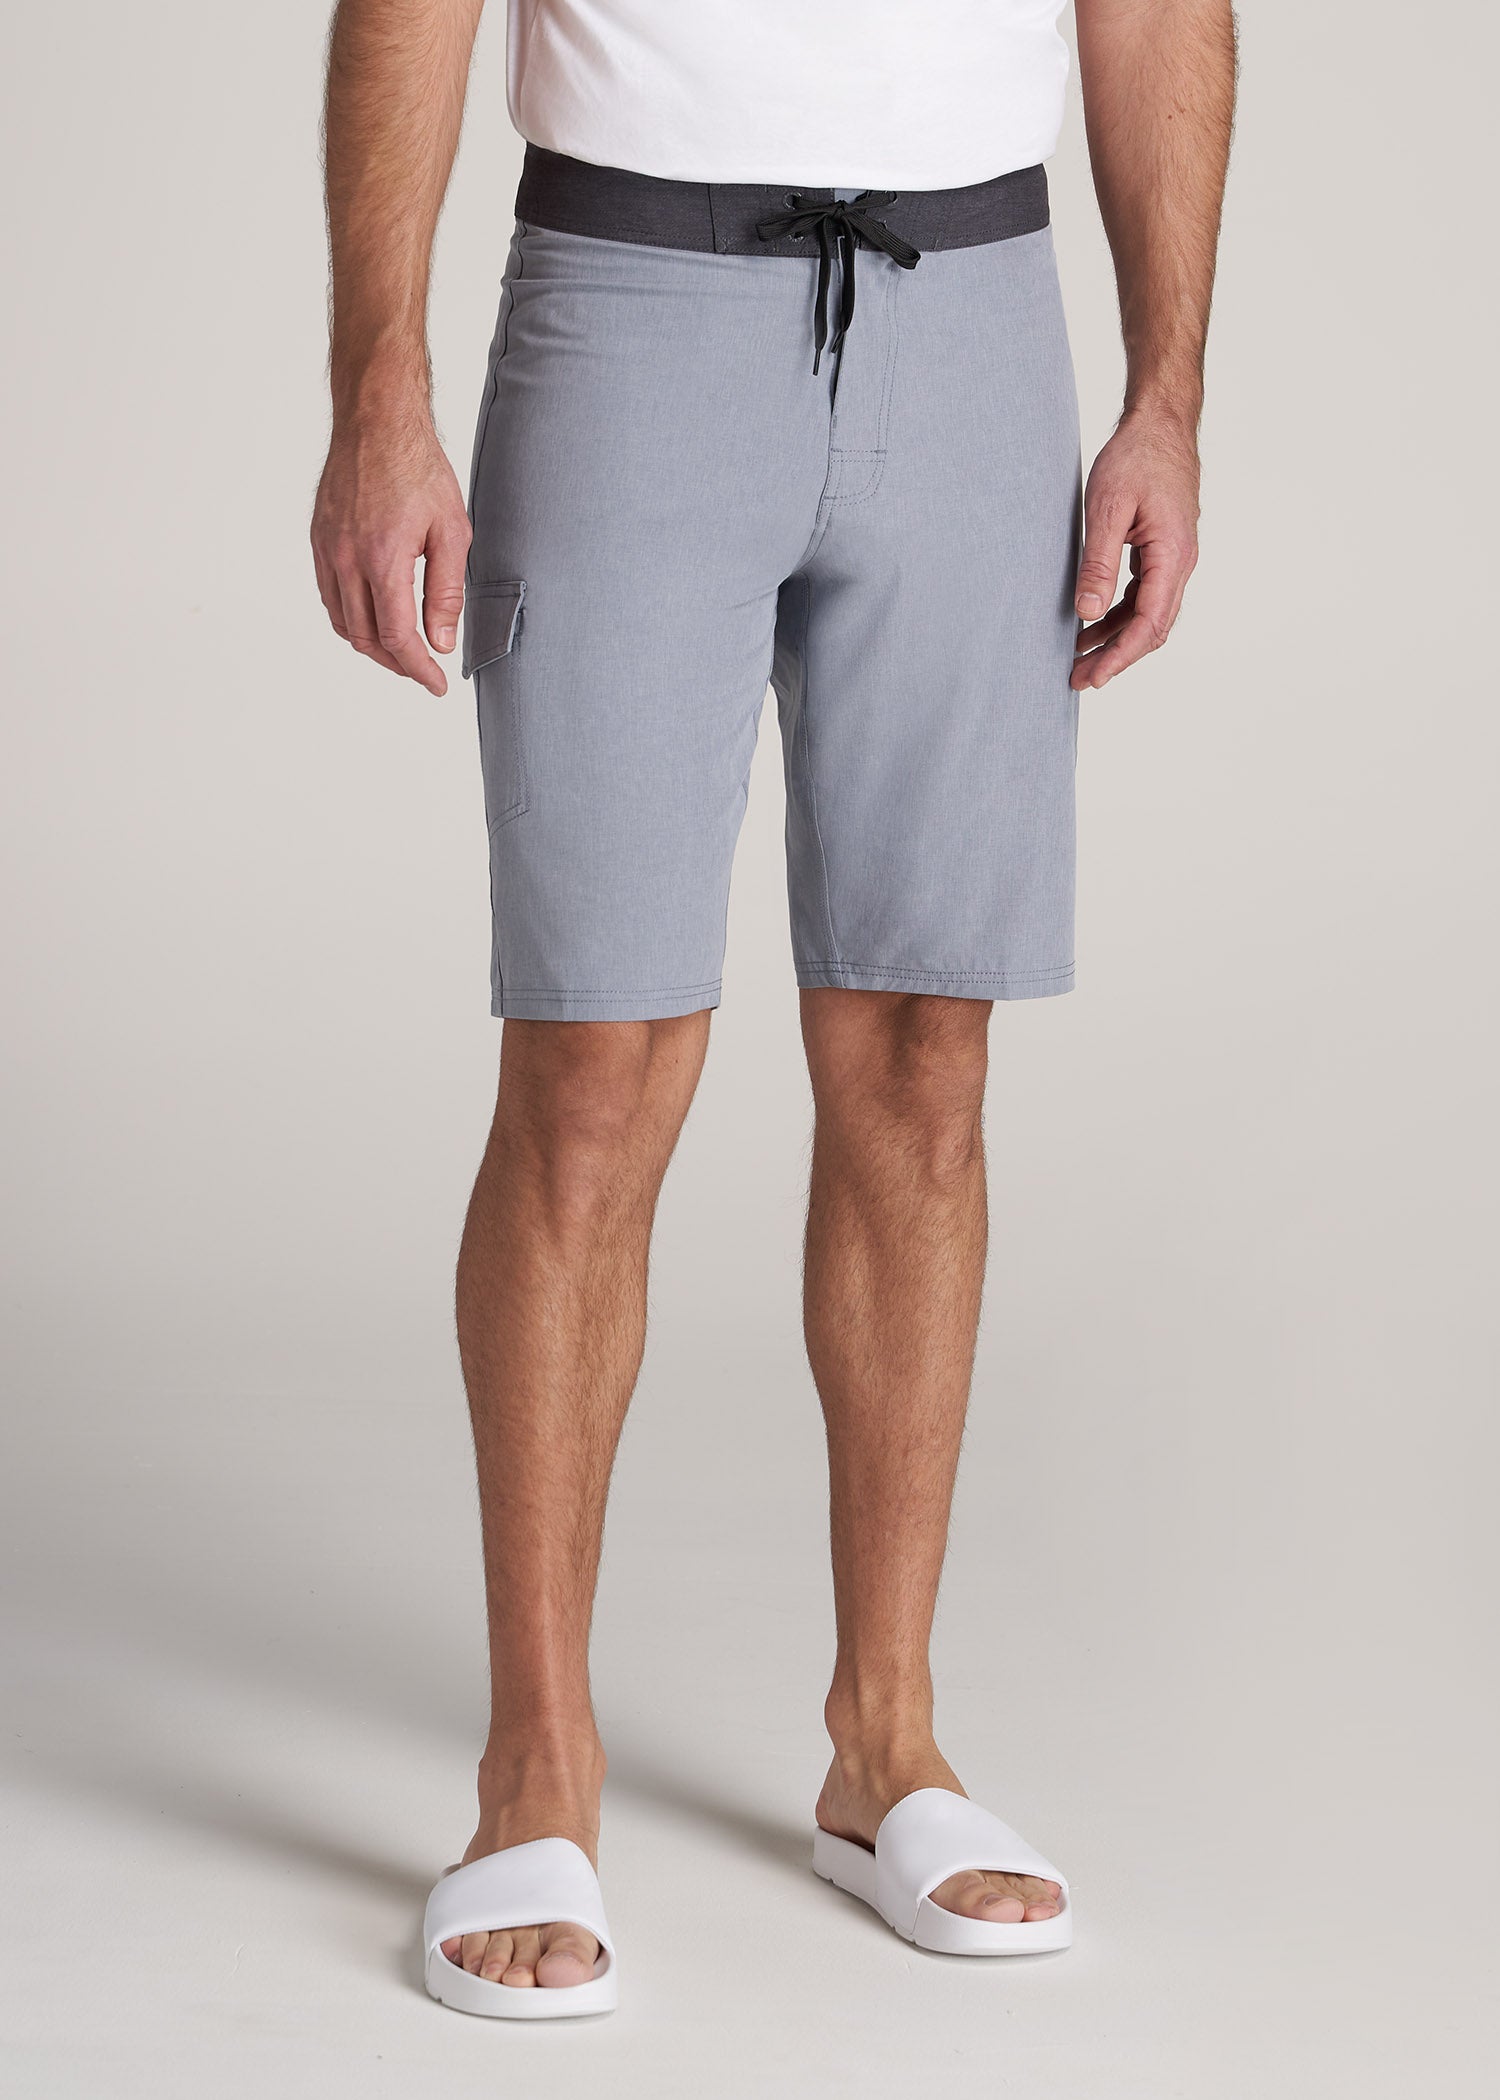    American-Tall-Men-BoardShort-HarbourGreyMix-front